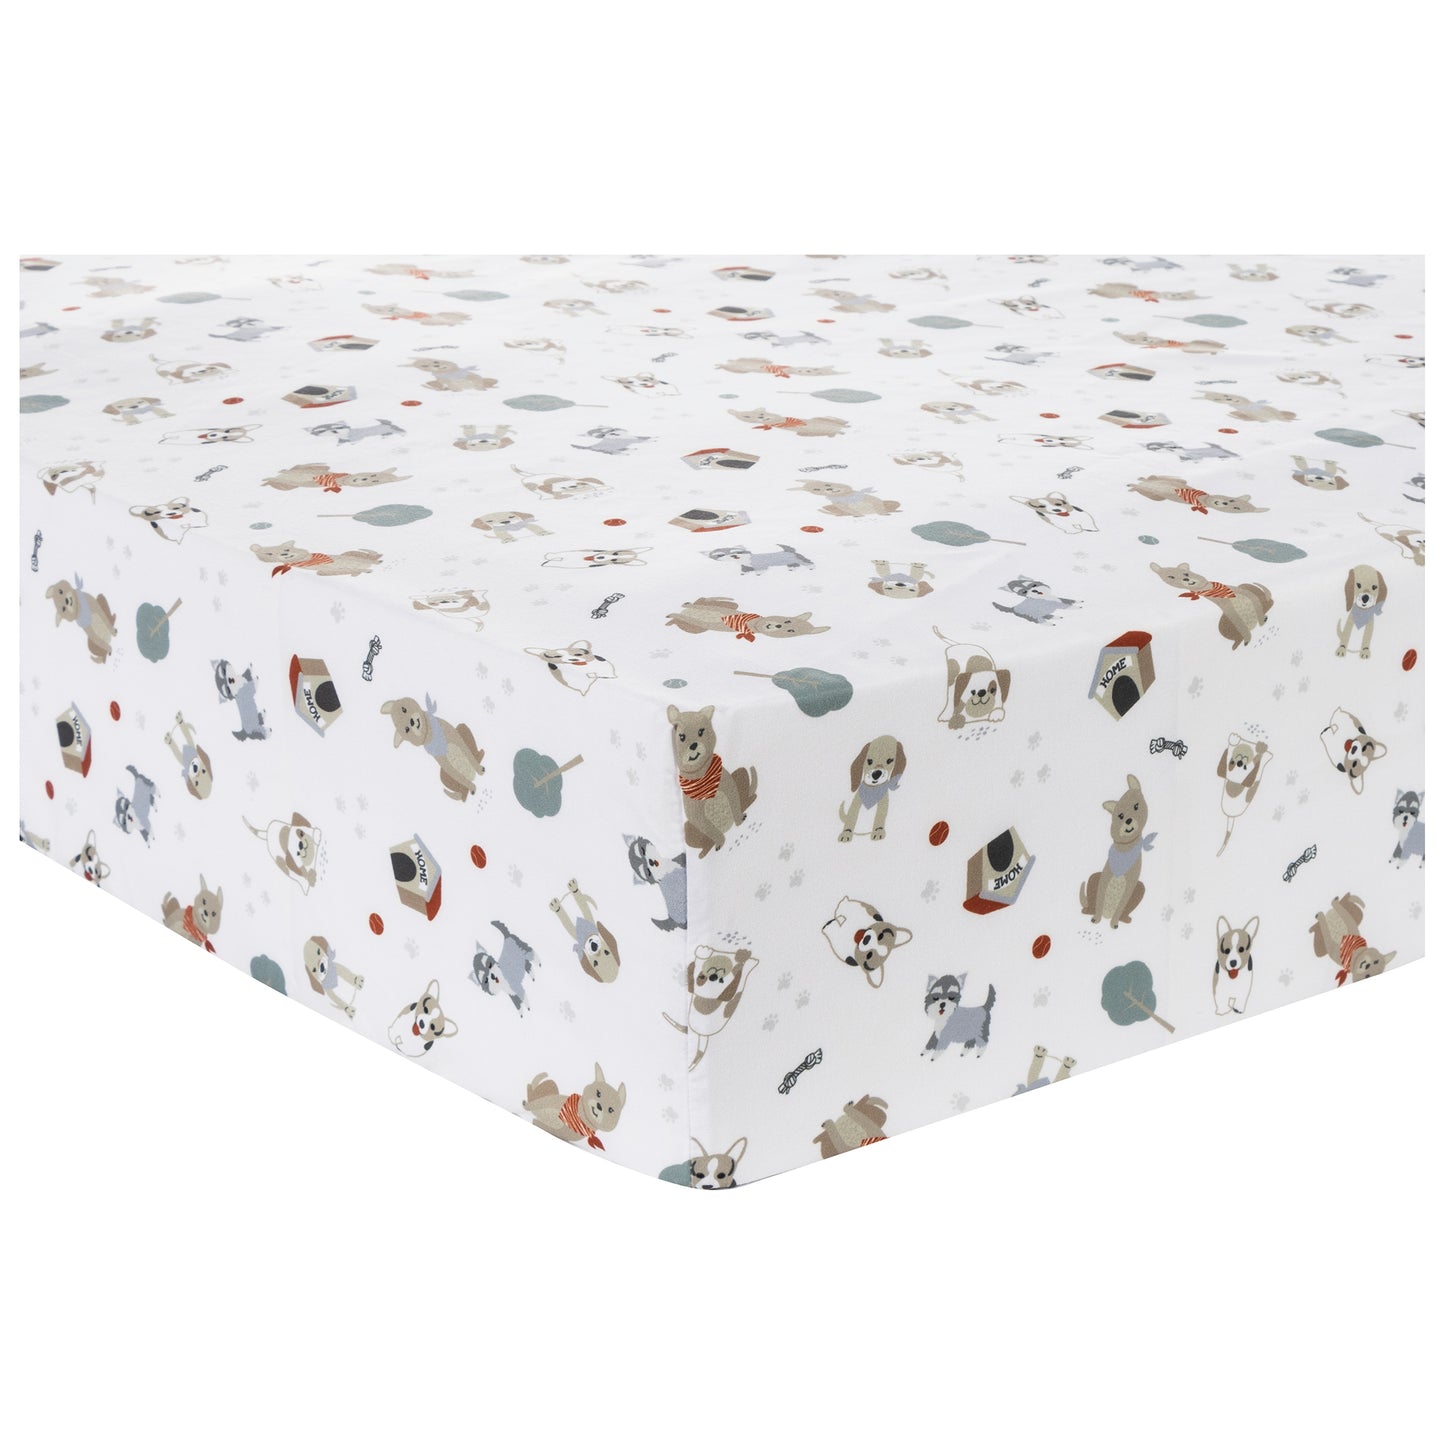 Fitted crib sheet fits standard crib mattress 28 in x 52 in with 8-inch-deep pockets and is fully elasticized for a secure fit. Crib sheet features cute dogs, paw prints, dog toys and trees.